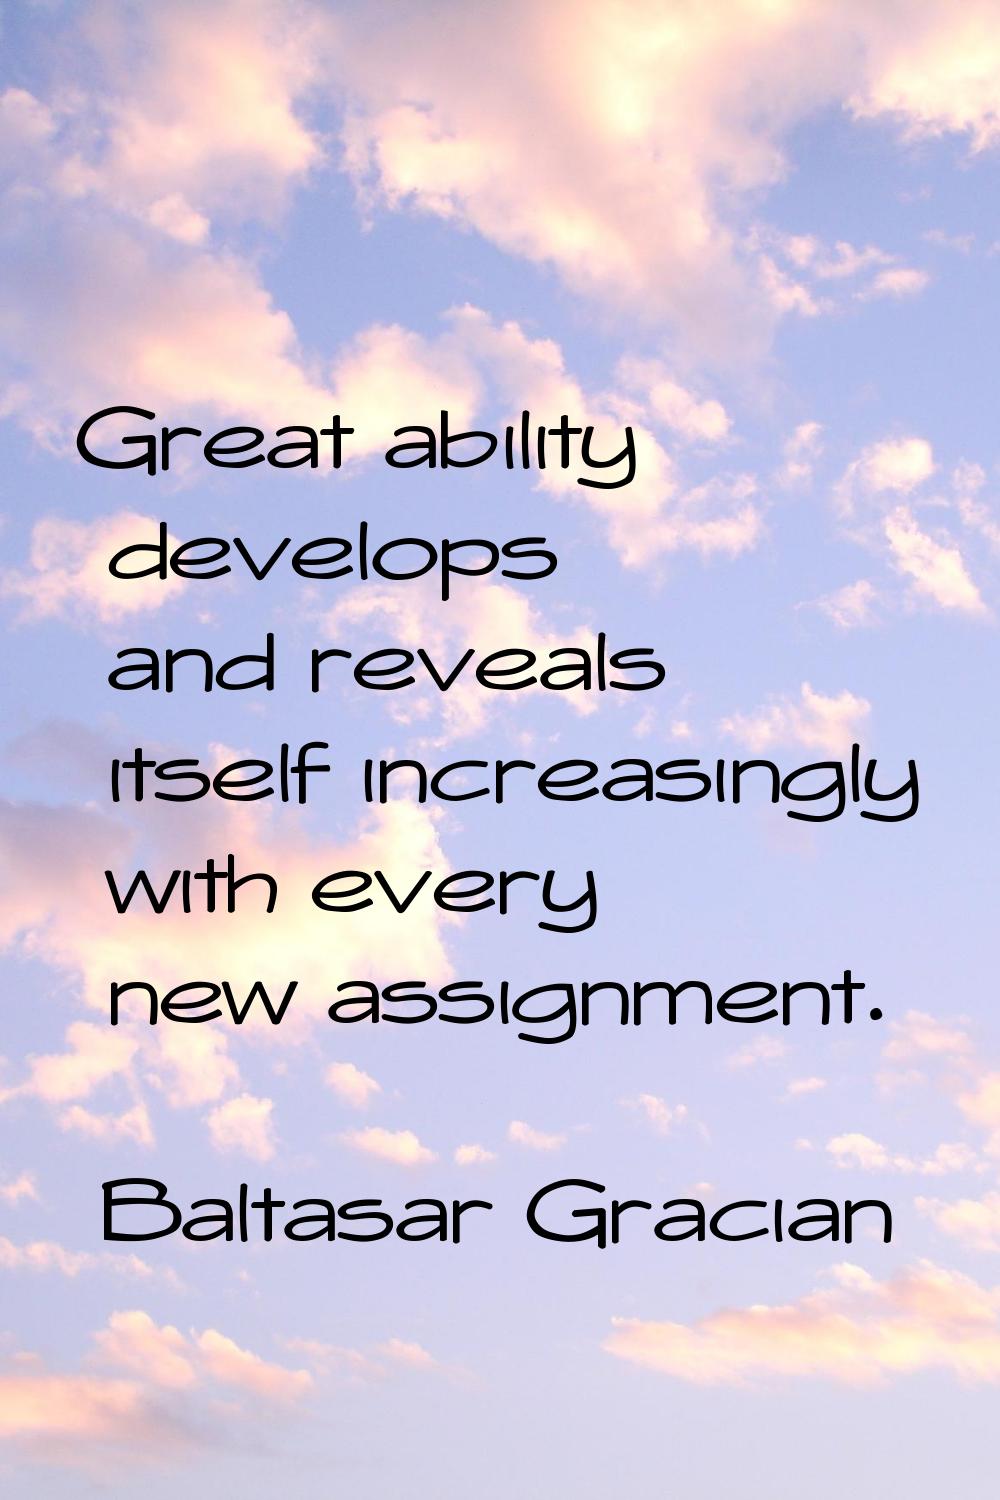 Great ability develops and reveals itself increasingly with every new assignment.